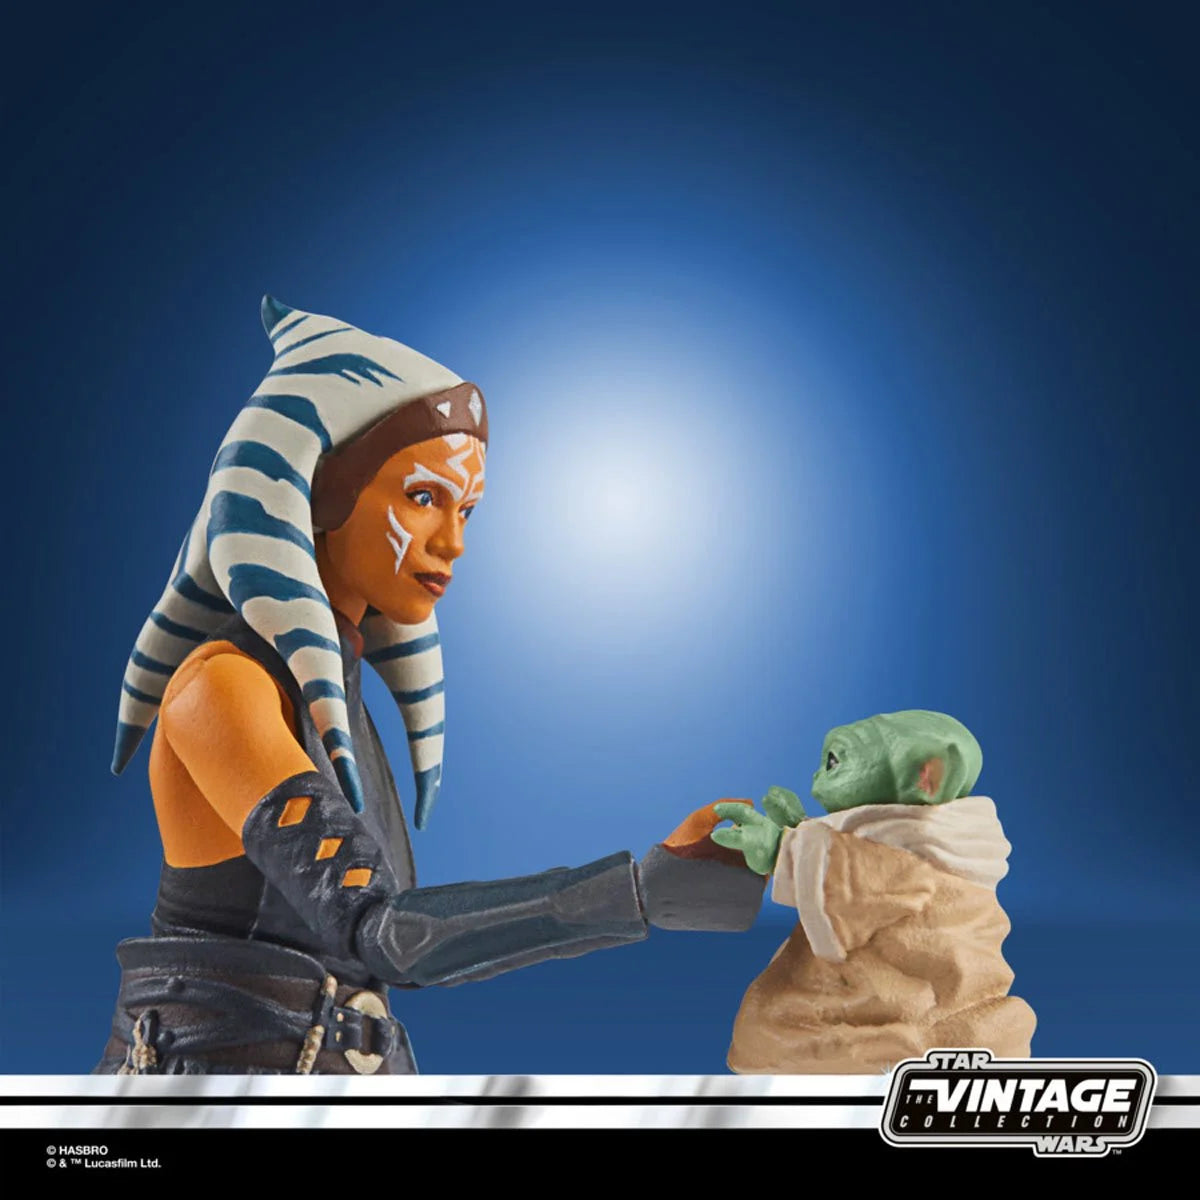 Star Wars The Vintage Collection Deluxe Ahsoka Tano and Grogu